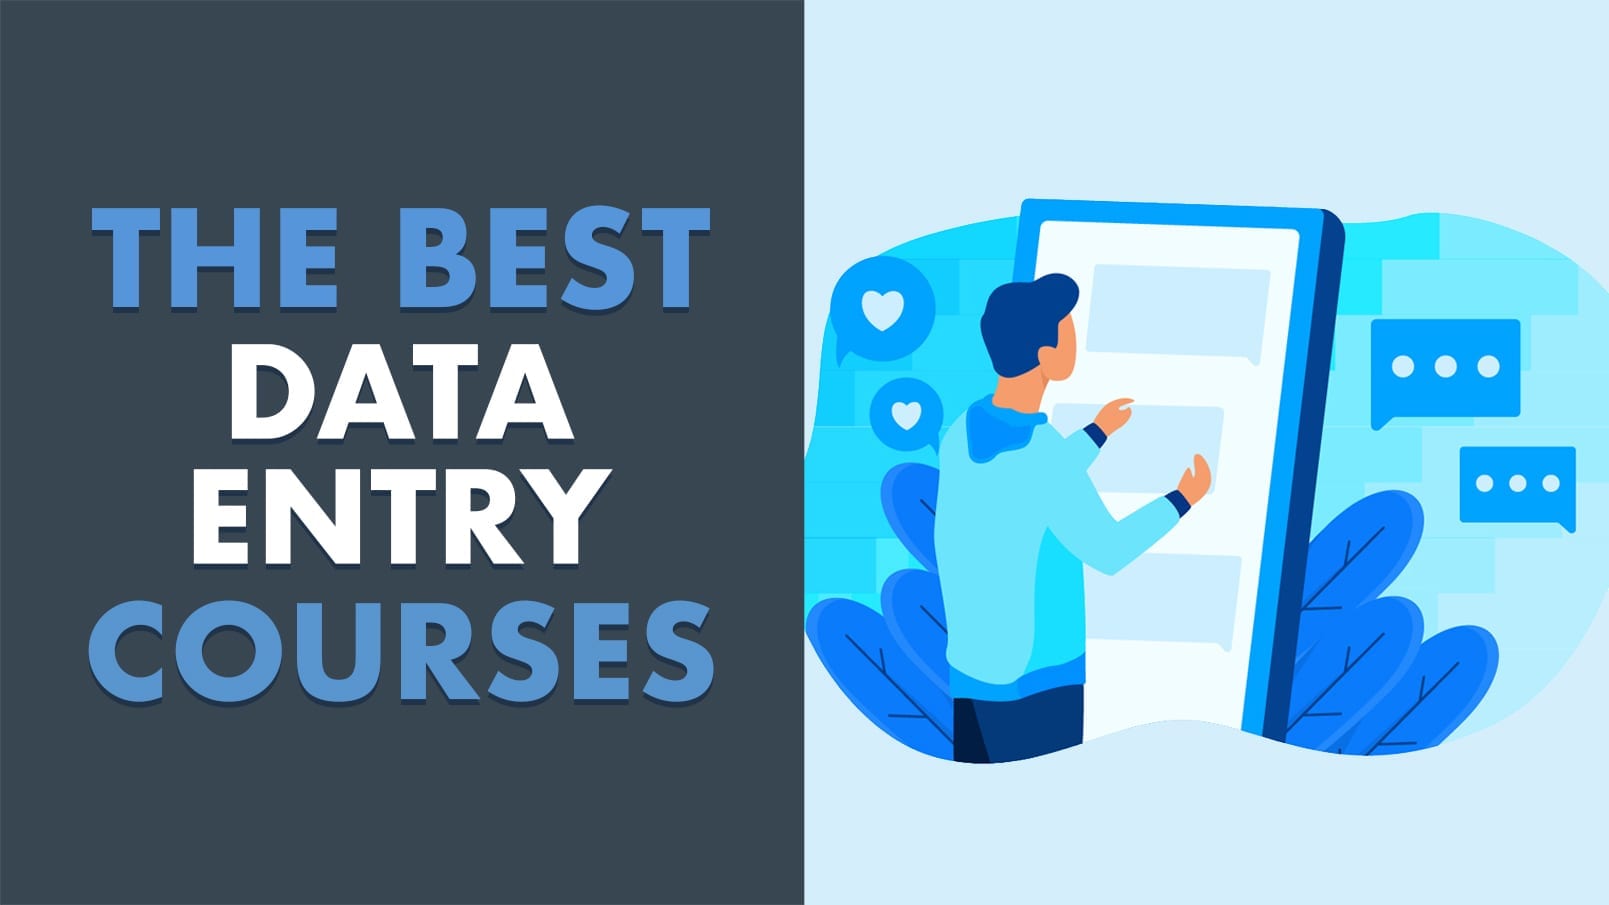 3 Best Data Entry Courses, Classes and Trainings with Certificate